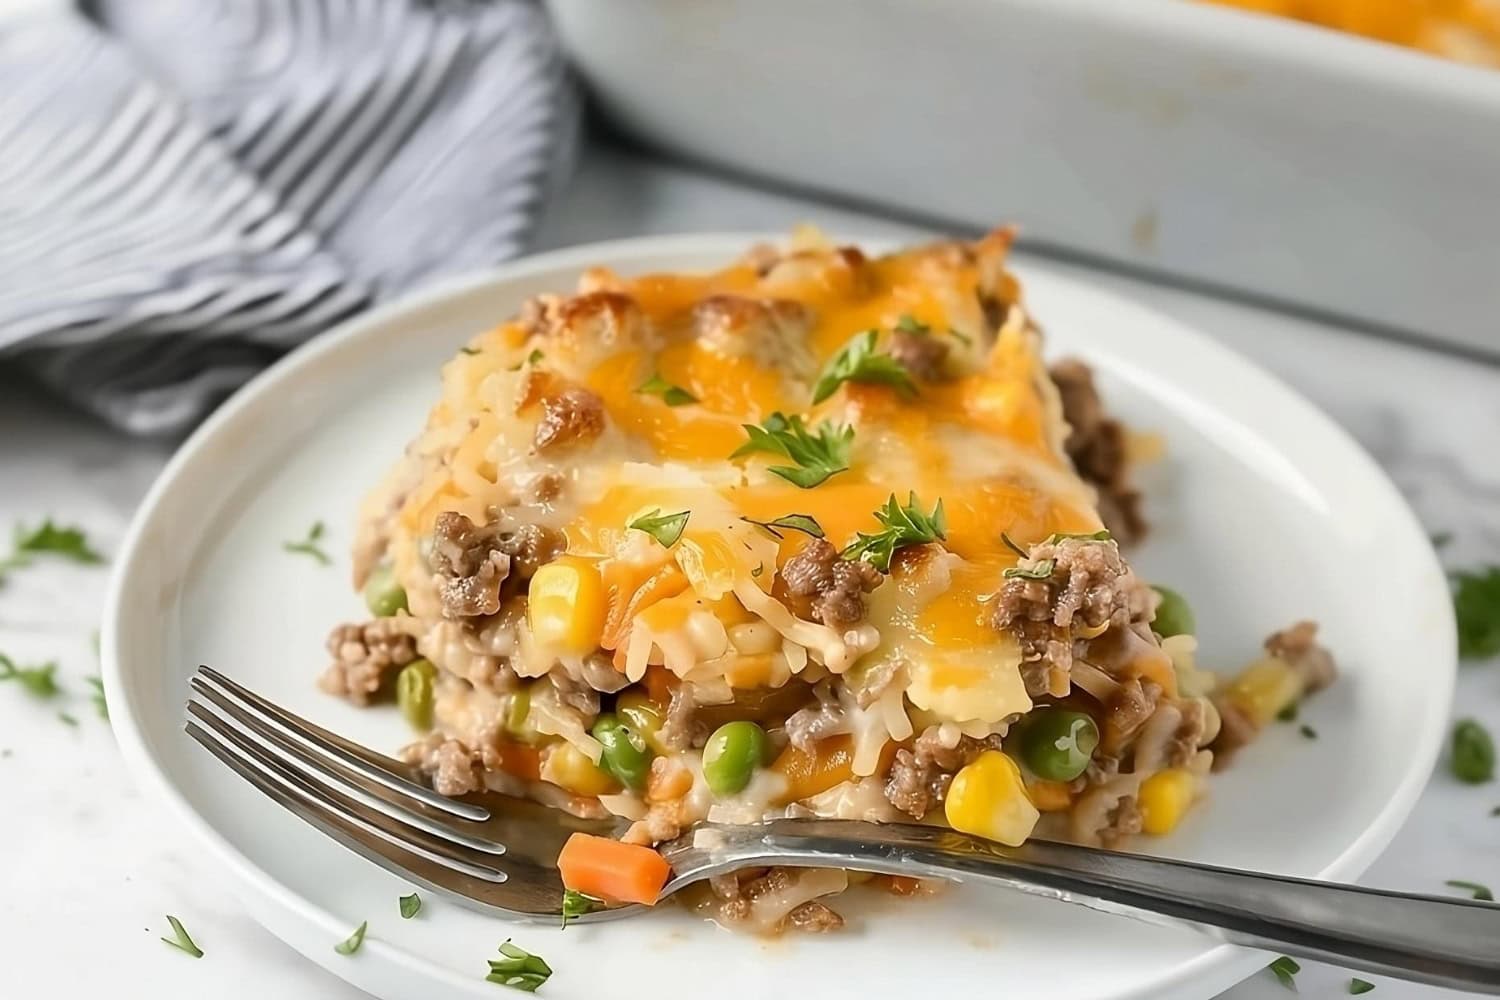 Slice of hamburger hashbrown casserole in plate with carrots, peas, and corn.